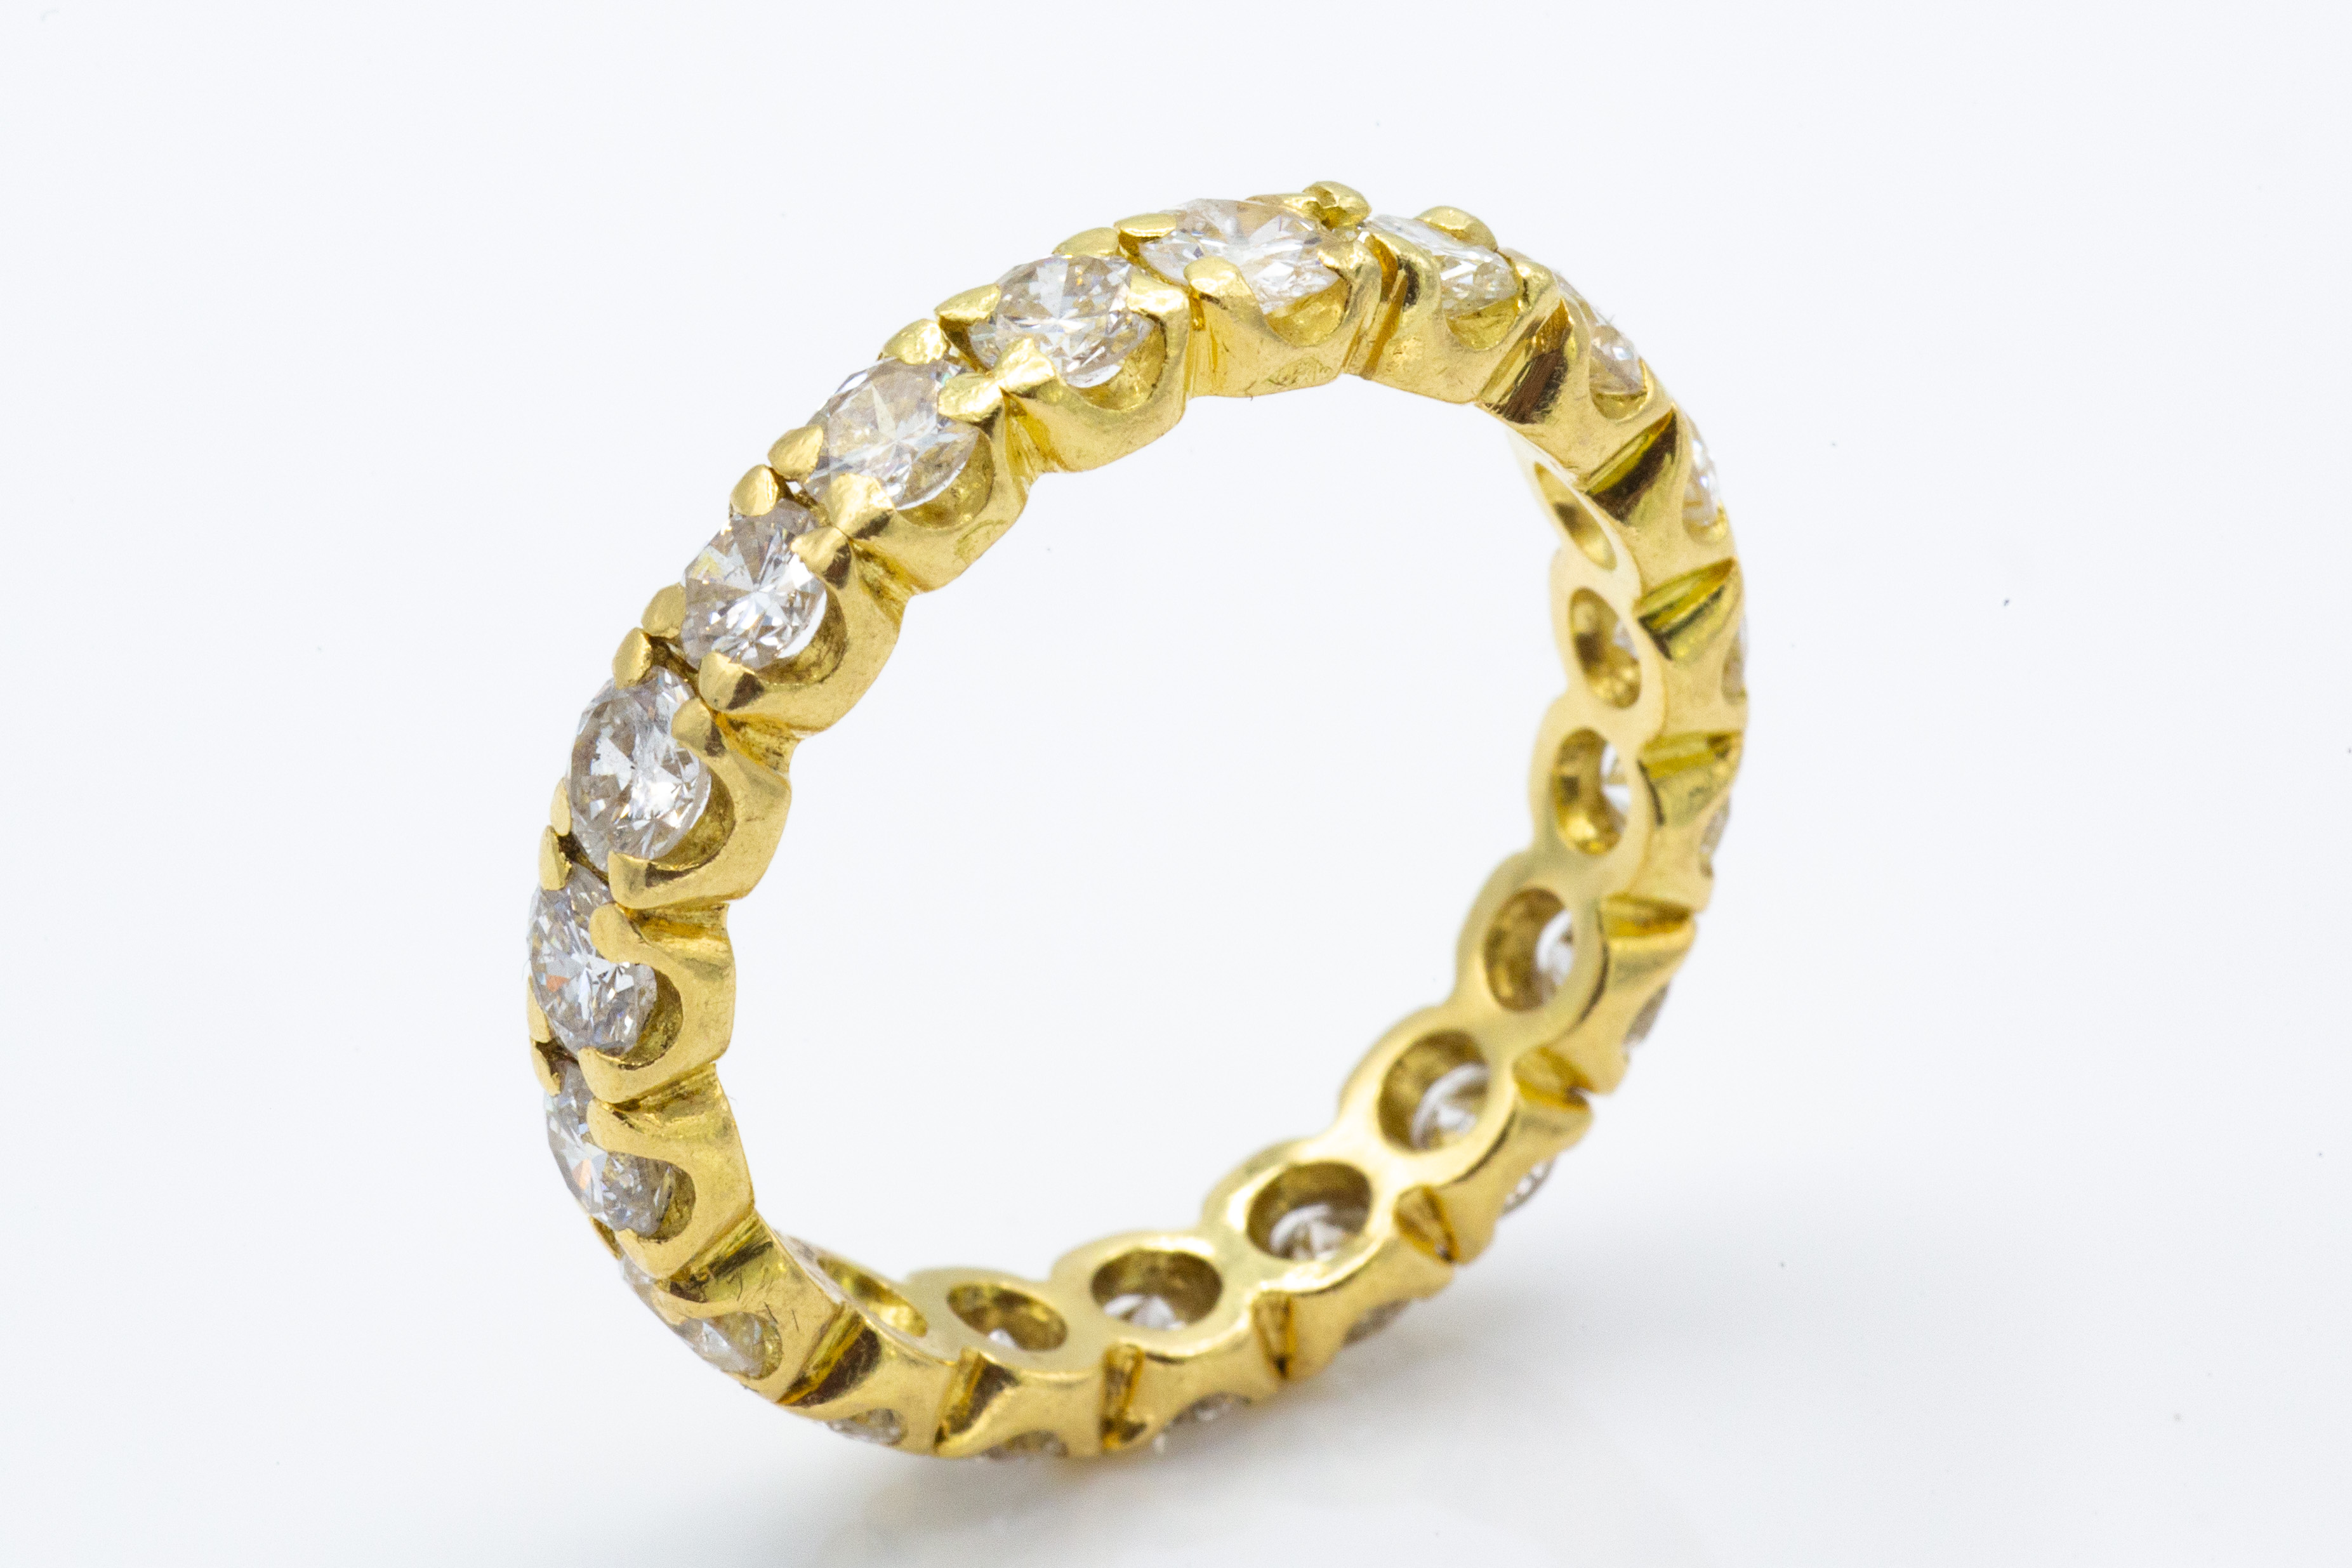 A French 18ct Gold & Diamond Eternity Ring - Image 2 of 4